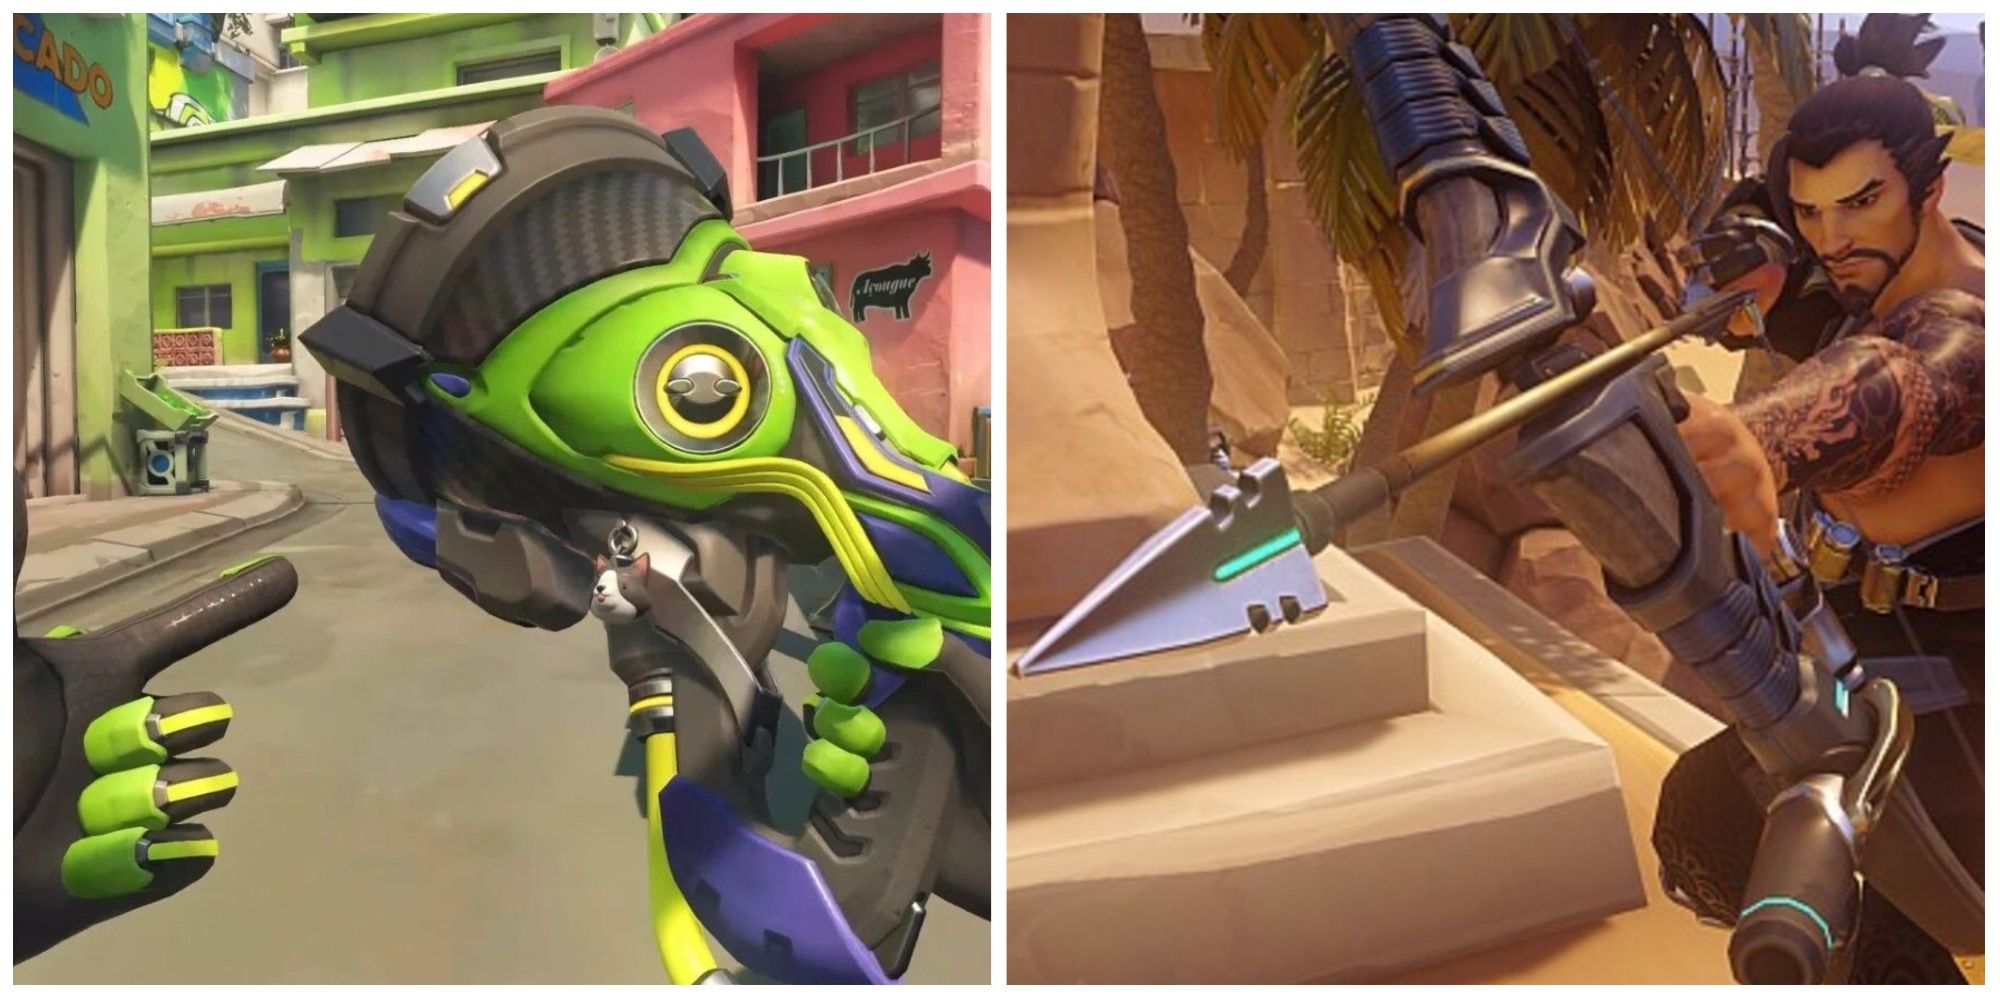 overwatch 2 hanzo's bow and lucio's sound amplifier